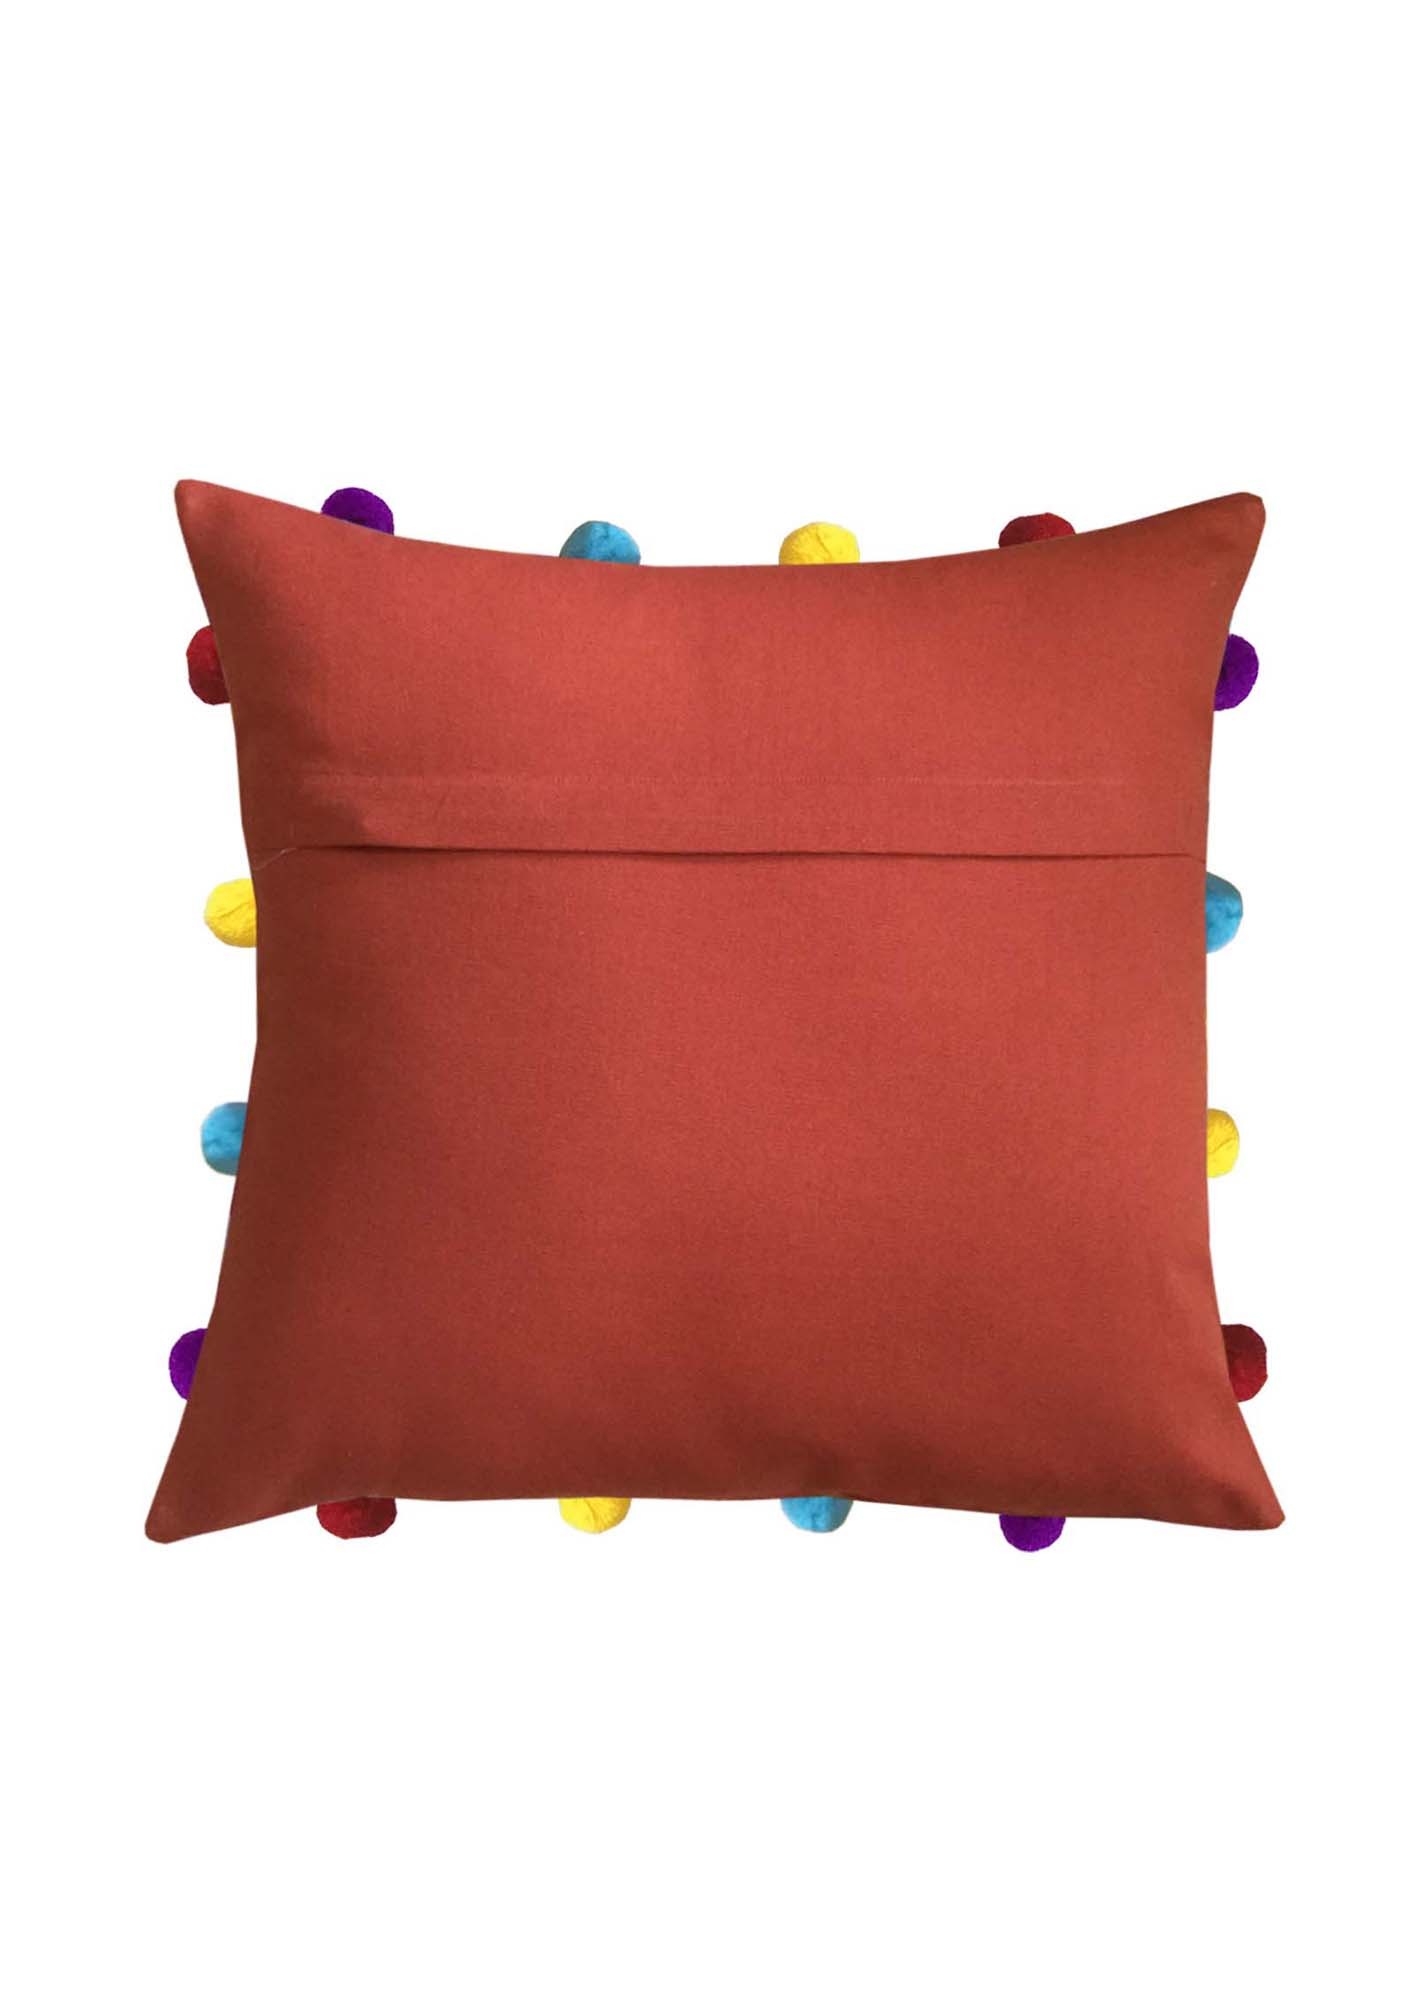 Lushomes Red Wood Sofa Cushion Cover Online with Colorful Pom Pom (Pack of 1 pc, 14 x 14 inches)